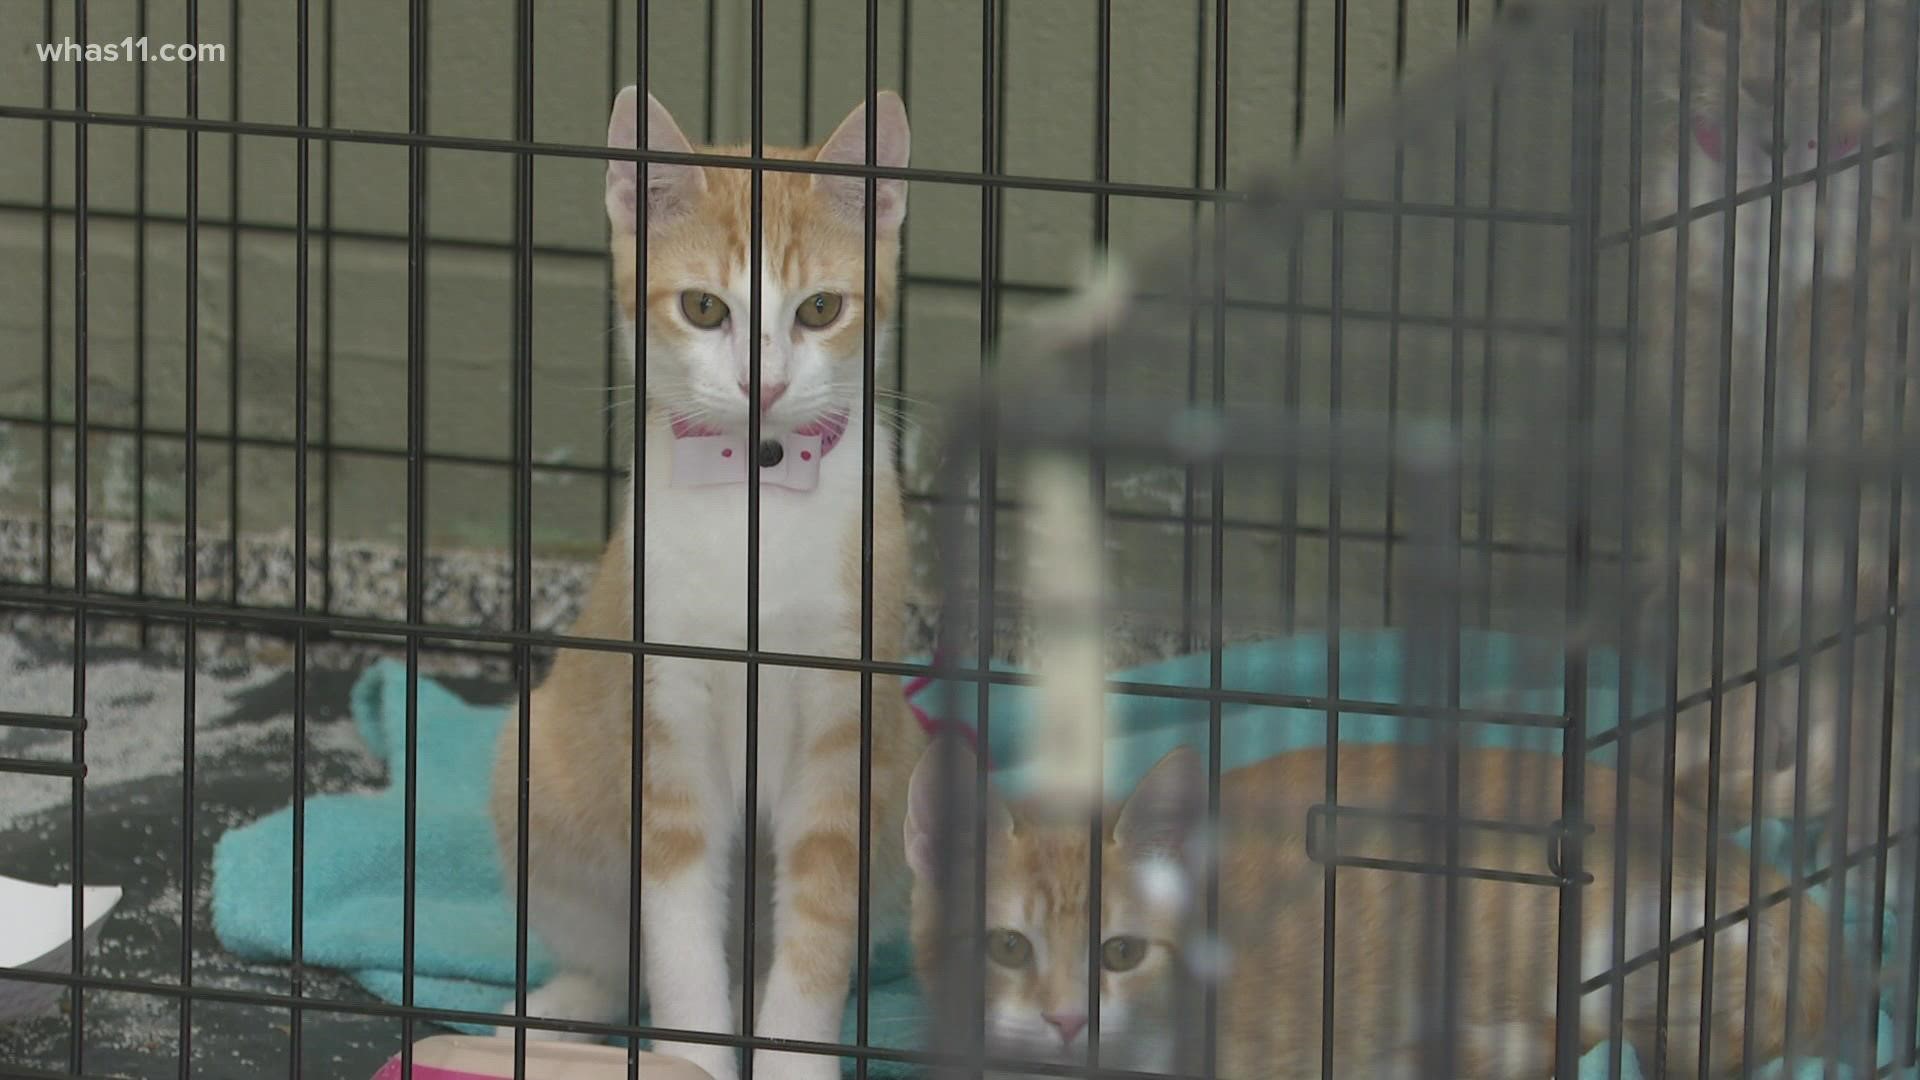 Kentucky Humane Society staff and volunteers are caring for the animals until they are healthy and ready for adoption or fostering.